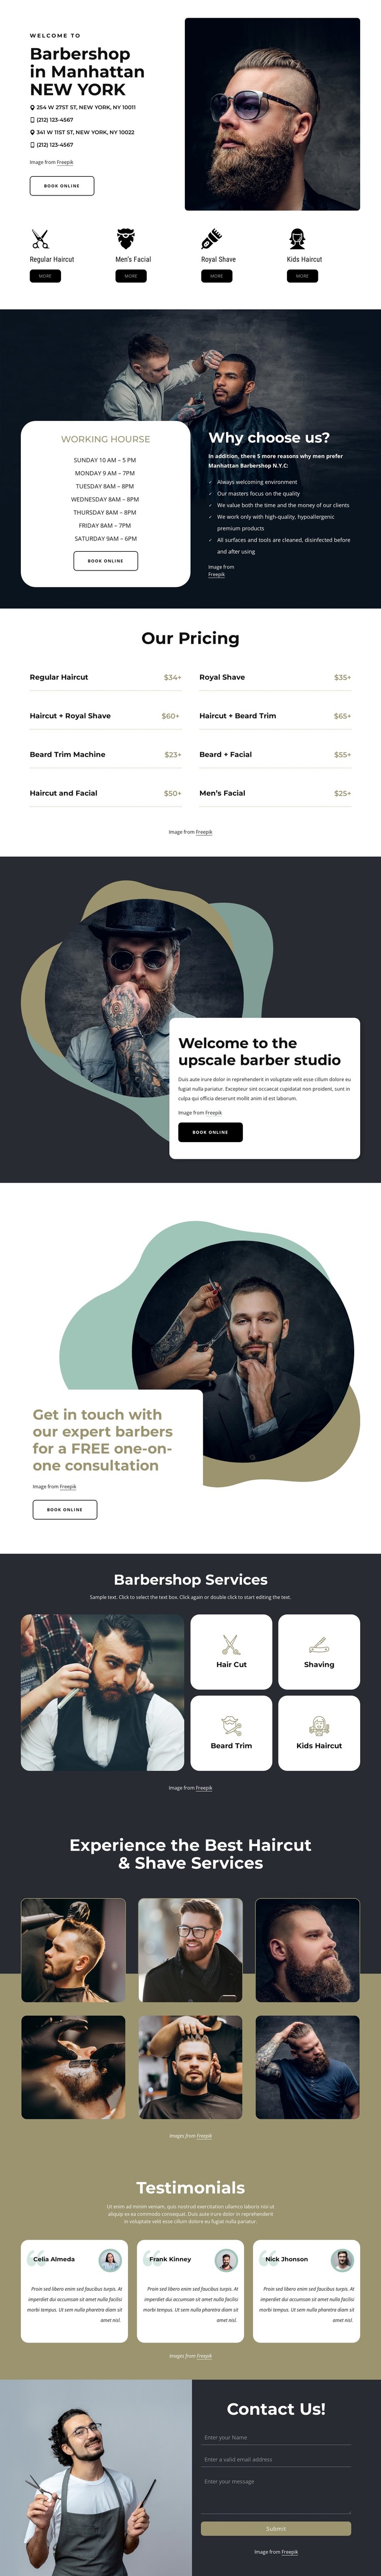 Hight quality grooming services WordPress Theme